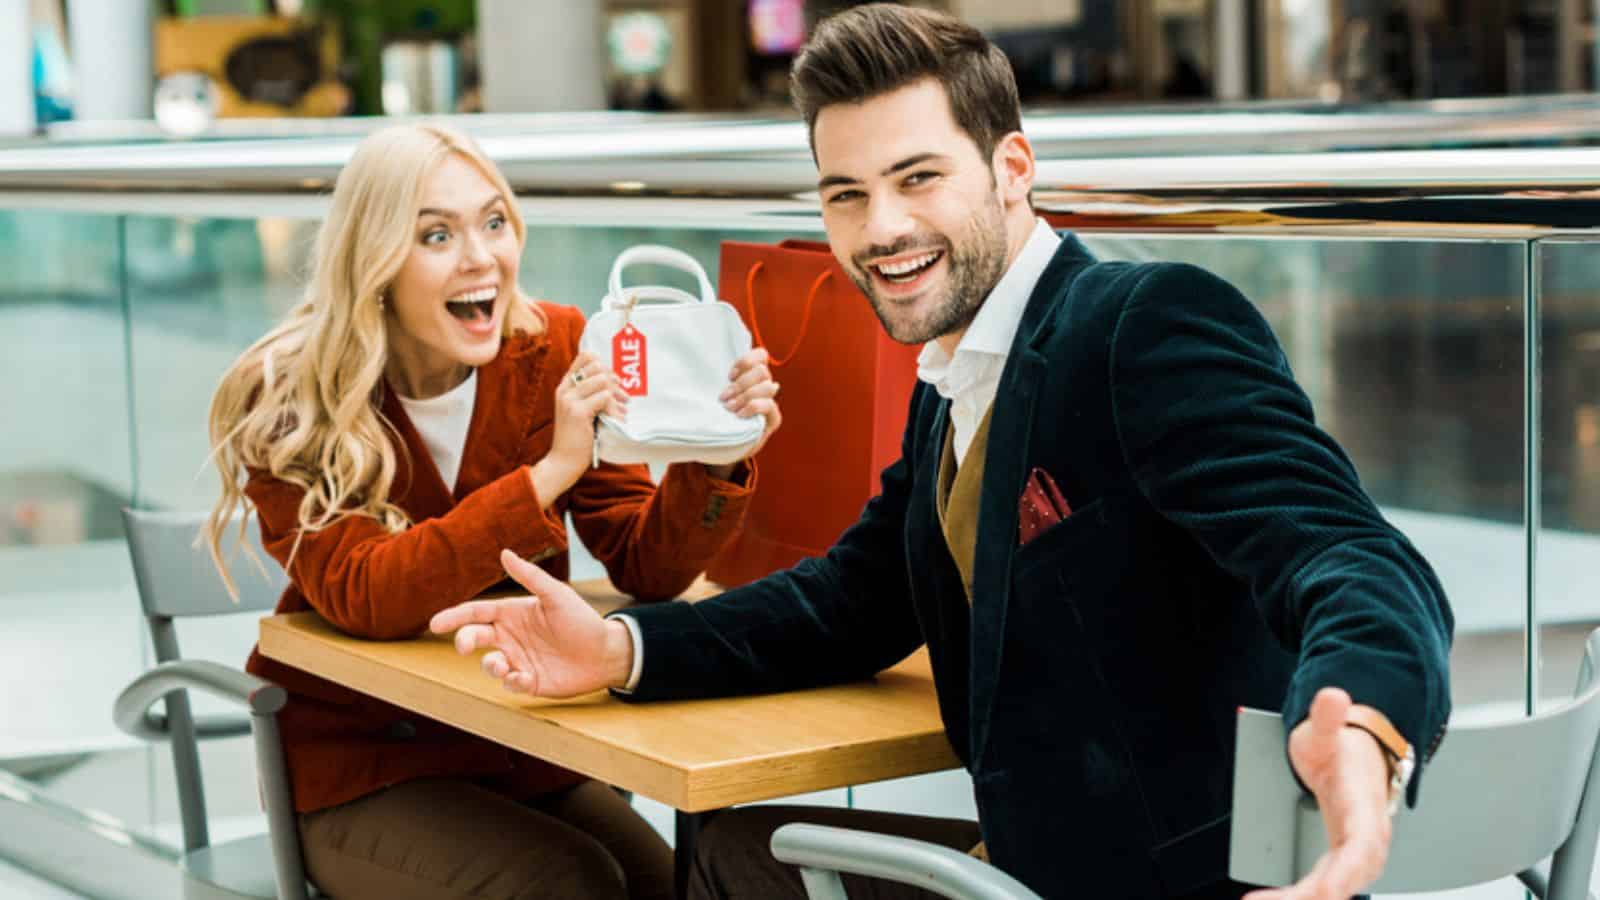 Excited female shopaholic showing bag with sale tag to laughing boyfriend